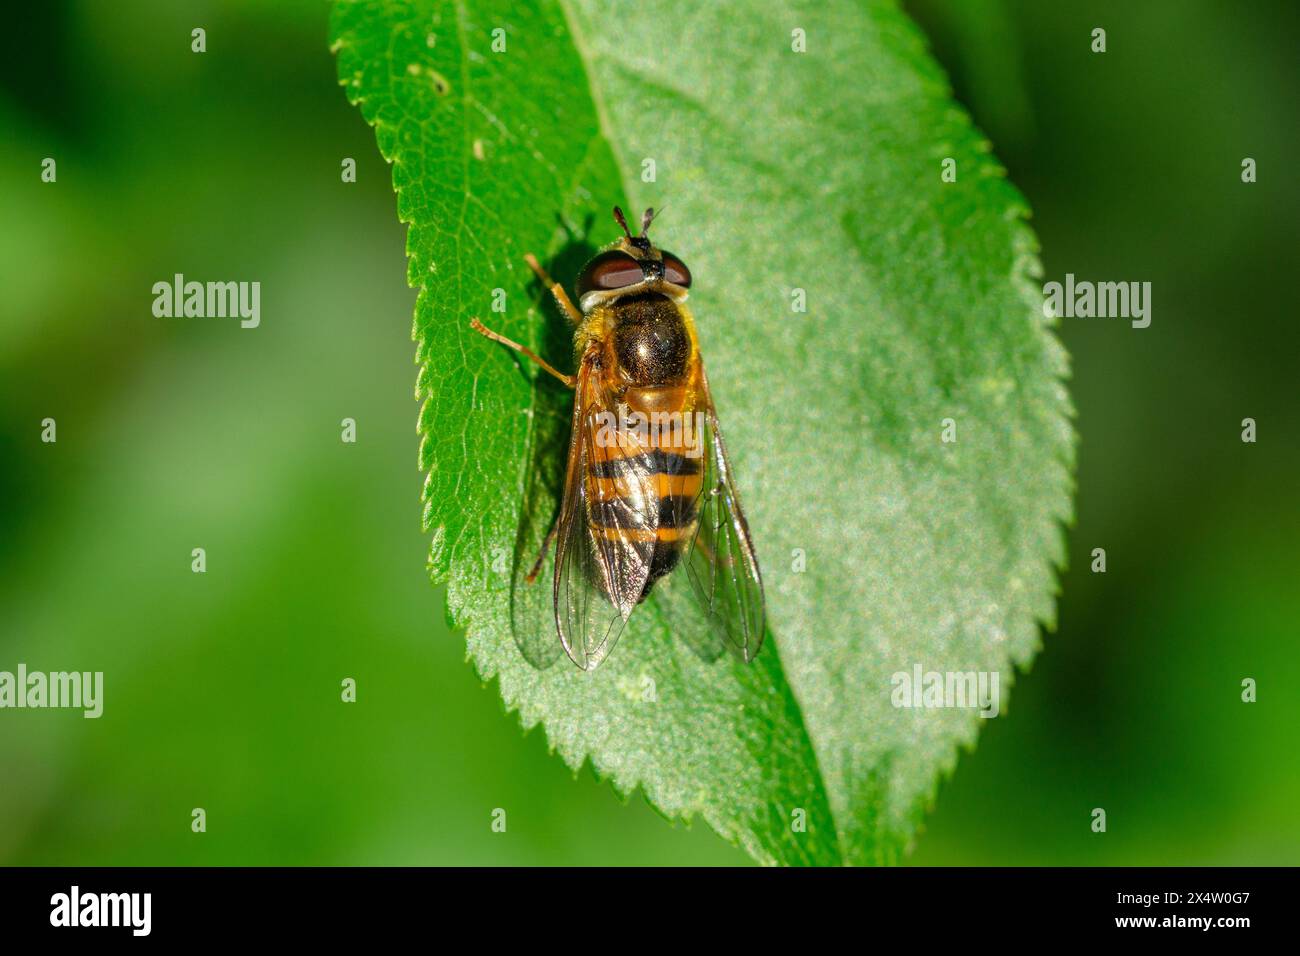 Close-up of a hoverfly (Epistrophe eligans) itting on a leaf in the sun Stock Photo